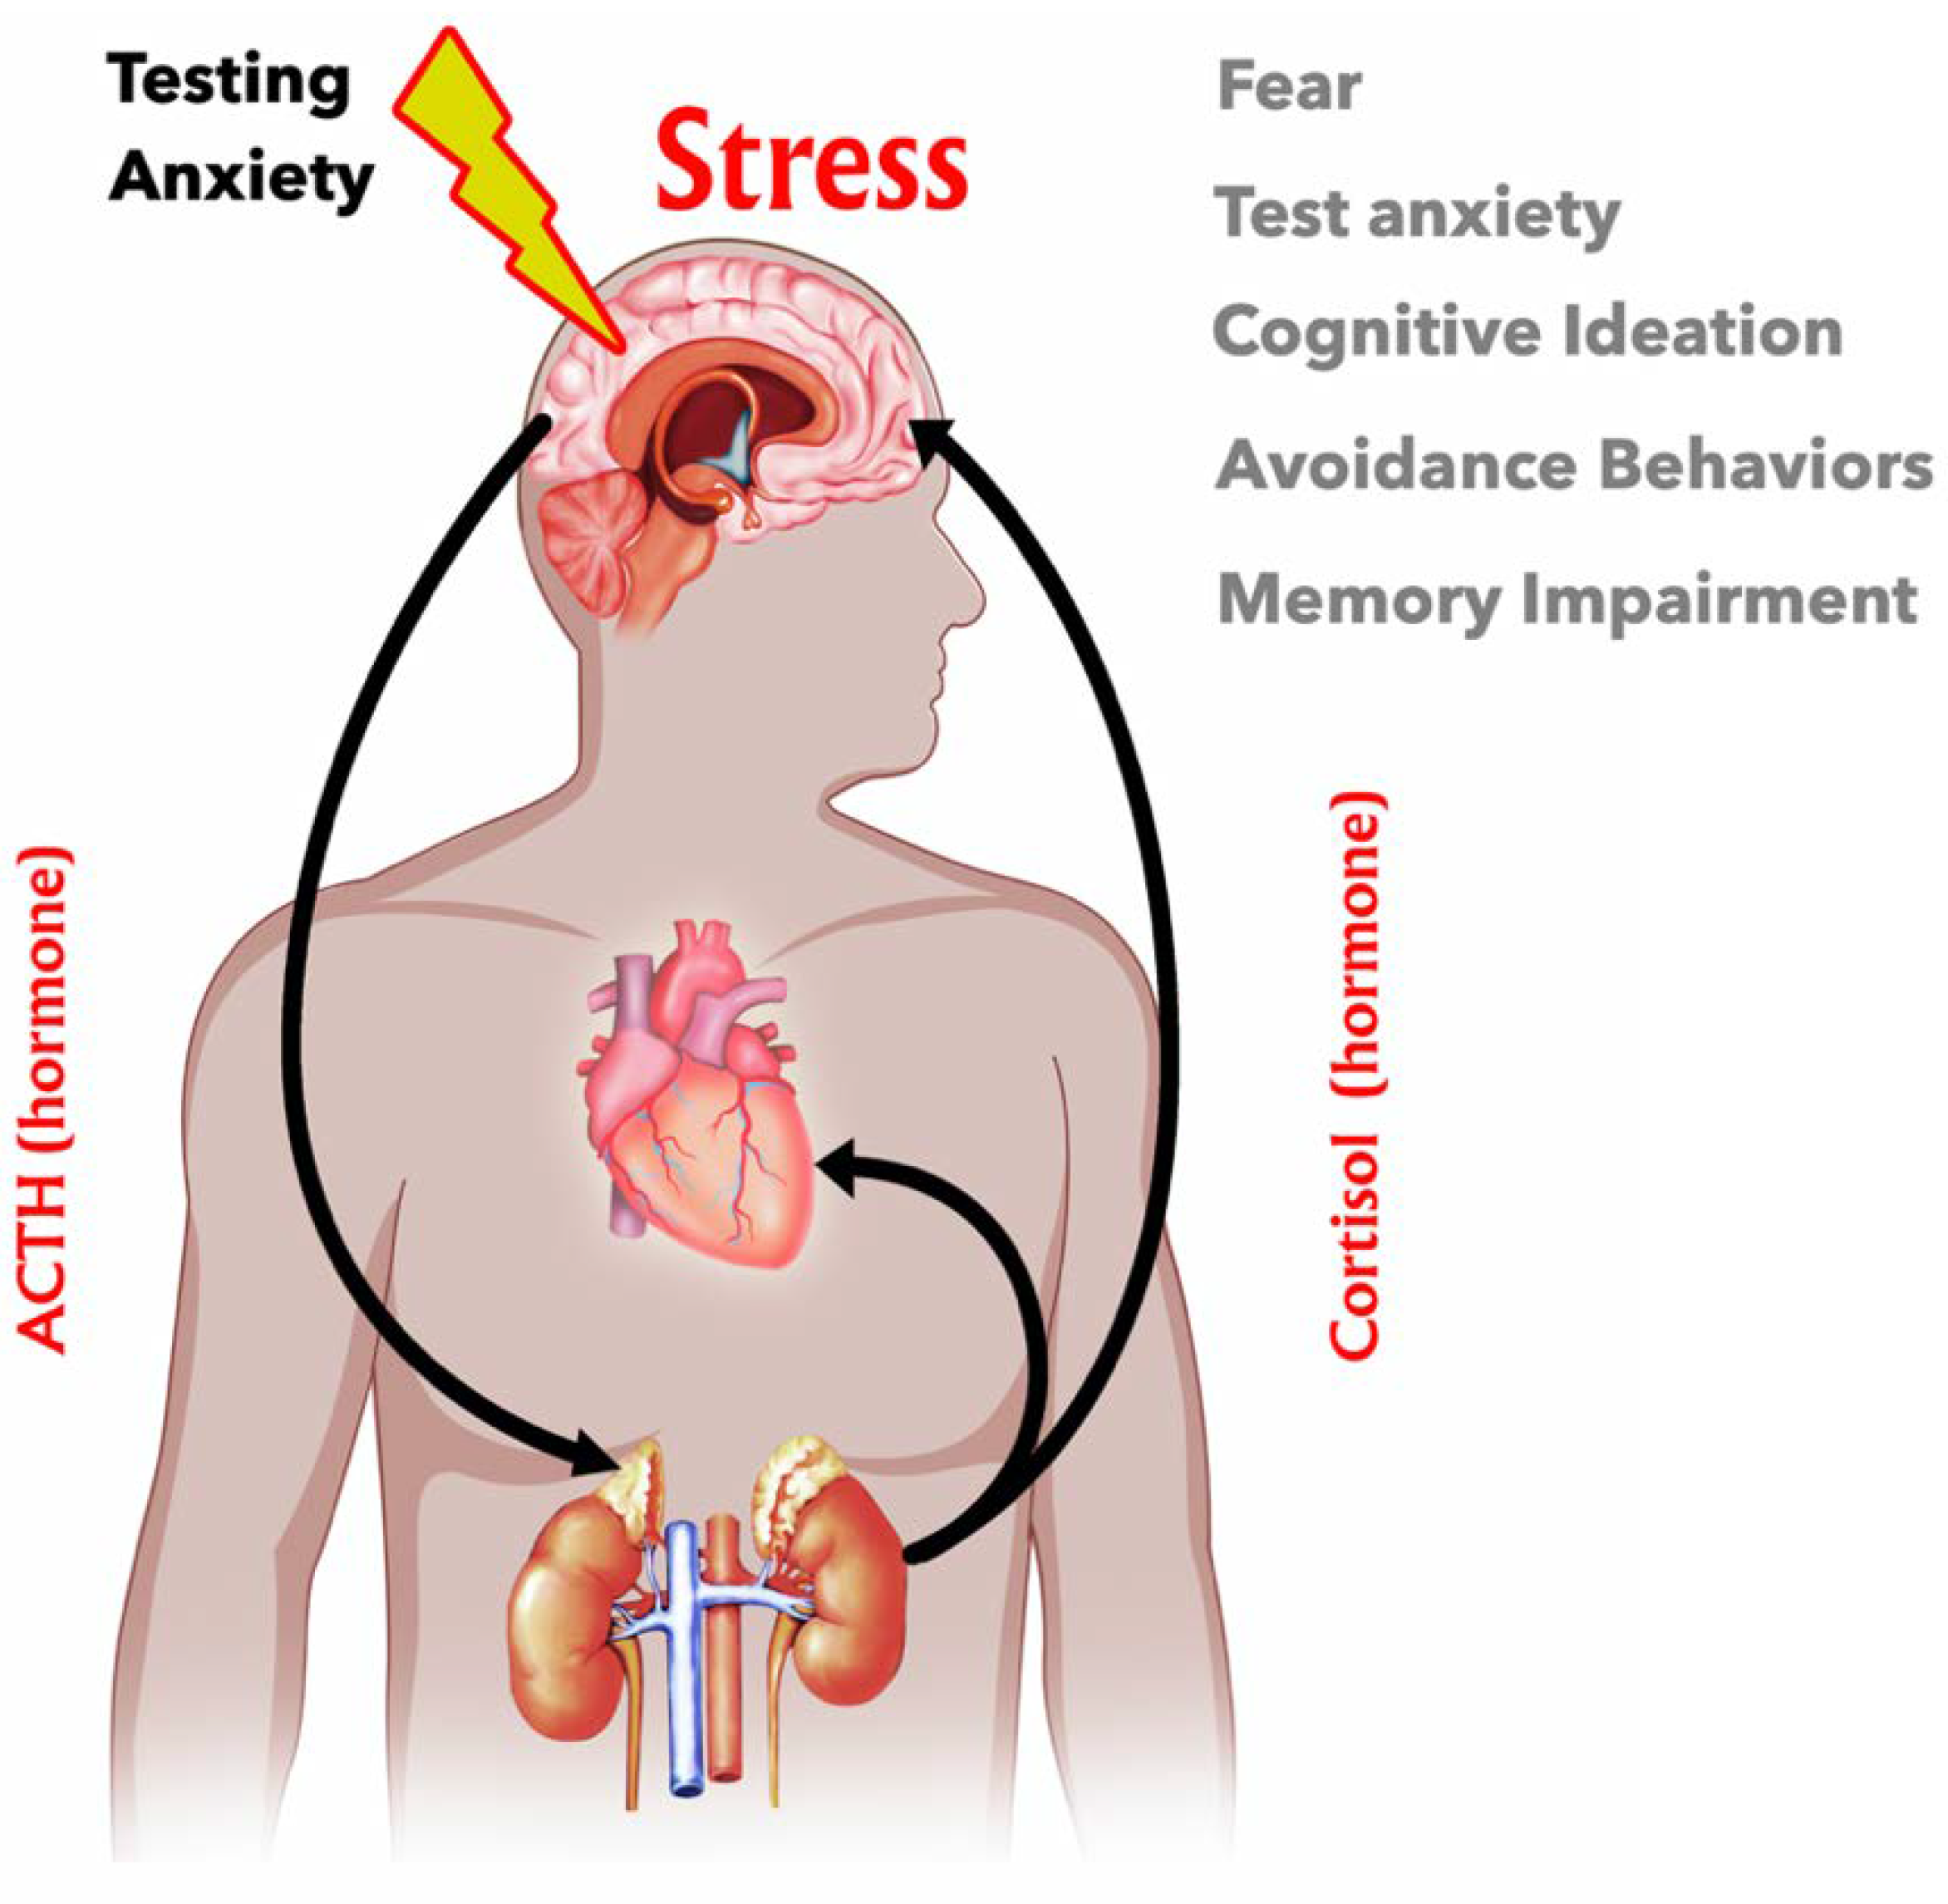 Stresses | Free Full-Text | The Role of the  Hypothalamus&ndash;Pituitary&ndash;Adrenal (HPA) Axis in Test-Induced  Anxiety: Assessments, Physiological Responses, and Molecular Details | HTML